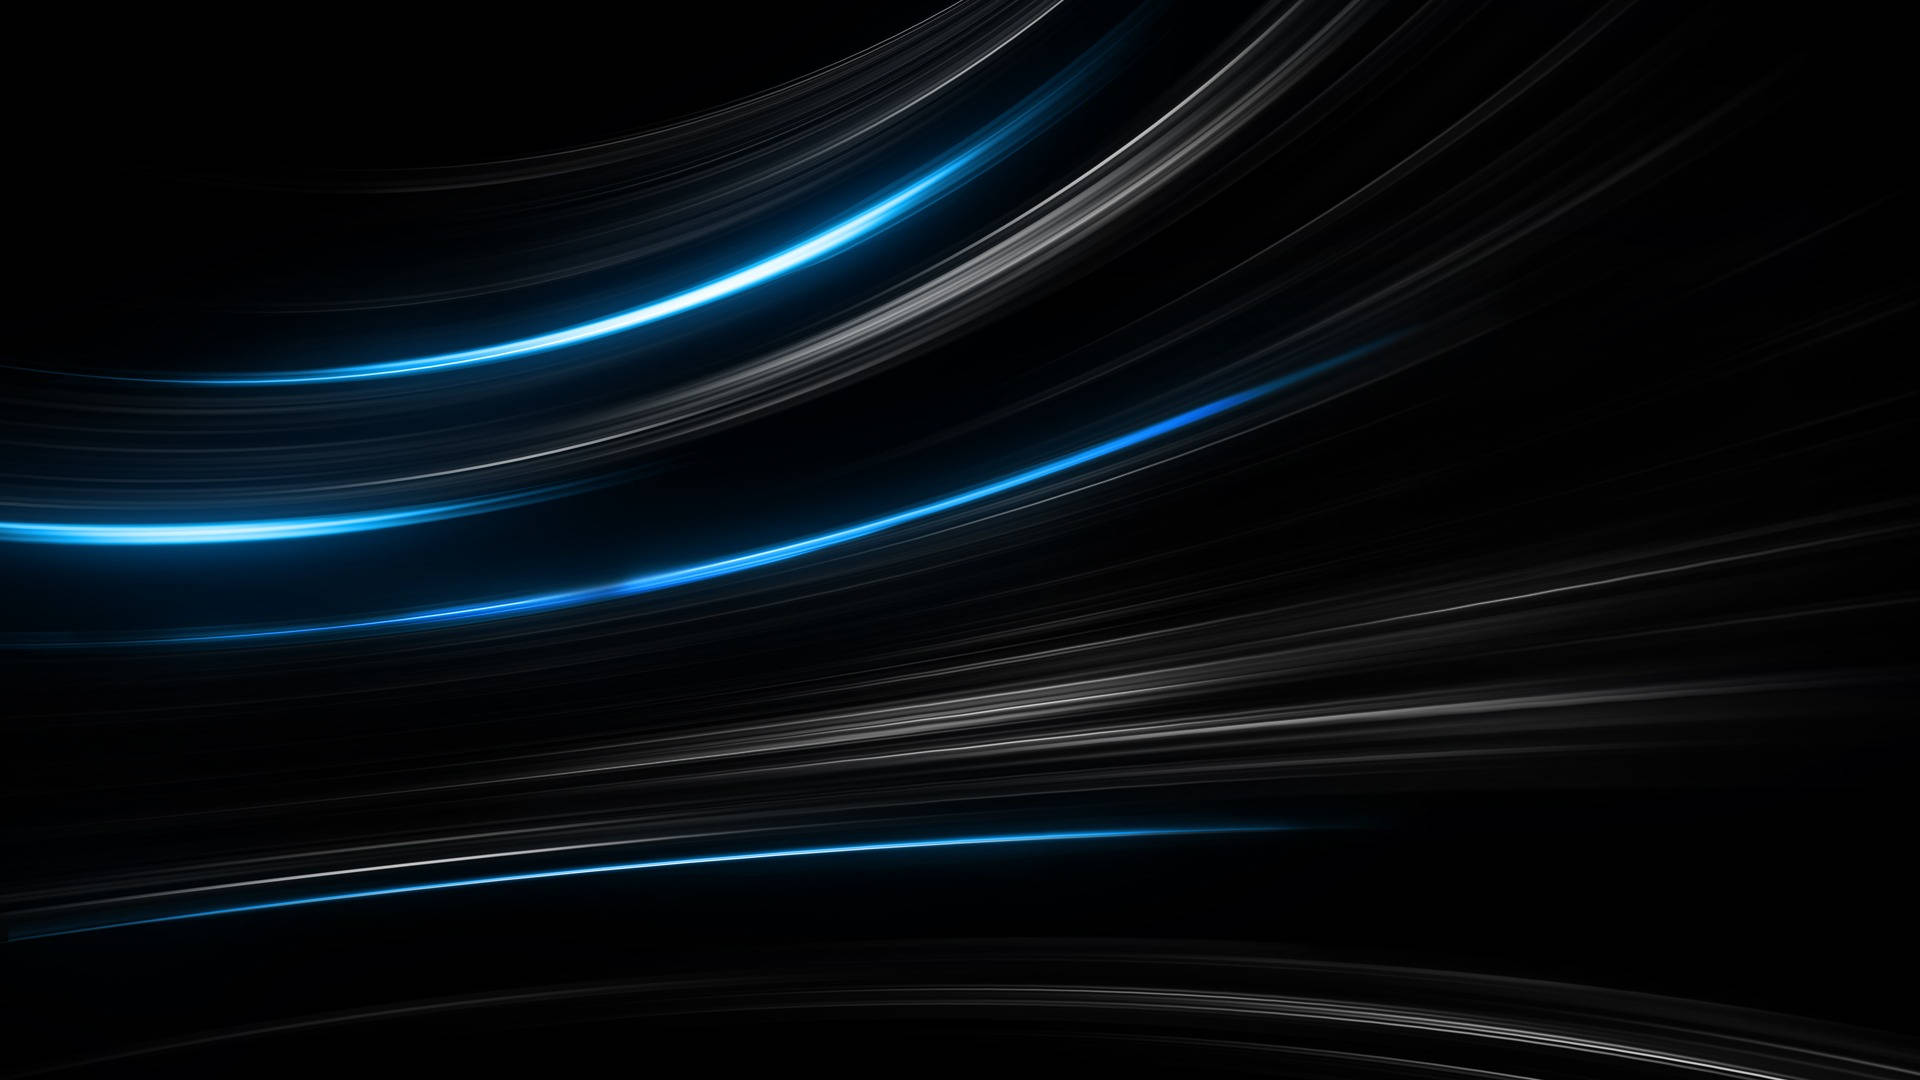 Dark Blue Aesthetic 1920X1080 Wallpaper and Background Image